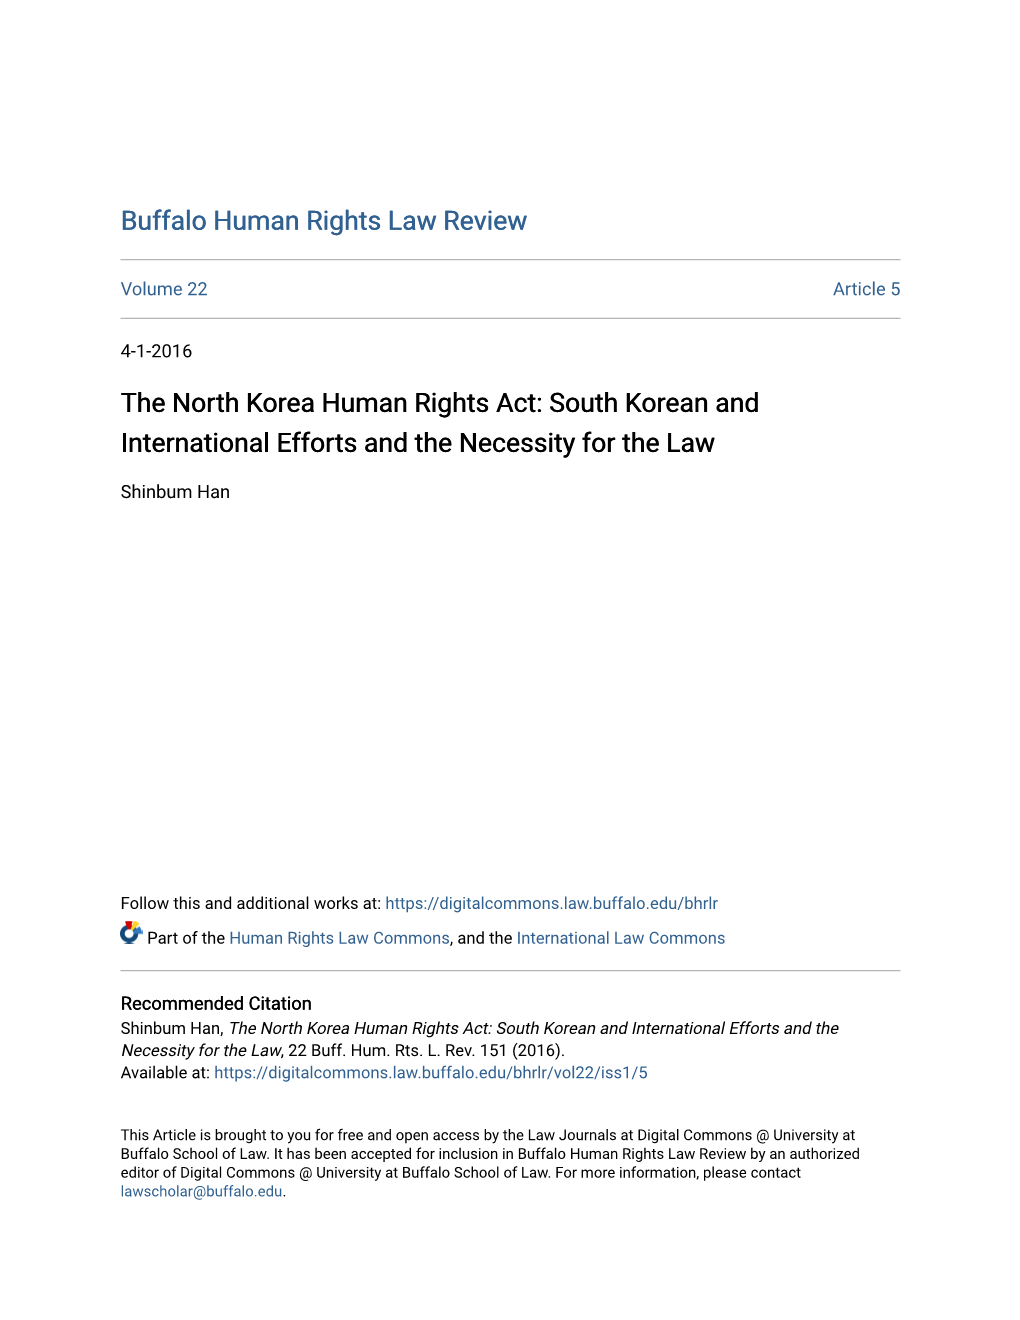 The North Korea Human Rights Act: South Korean and International Efforts and the Necessity for the Law